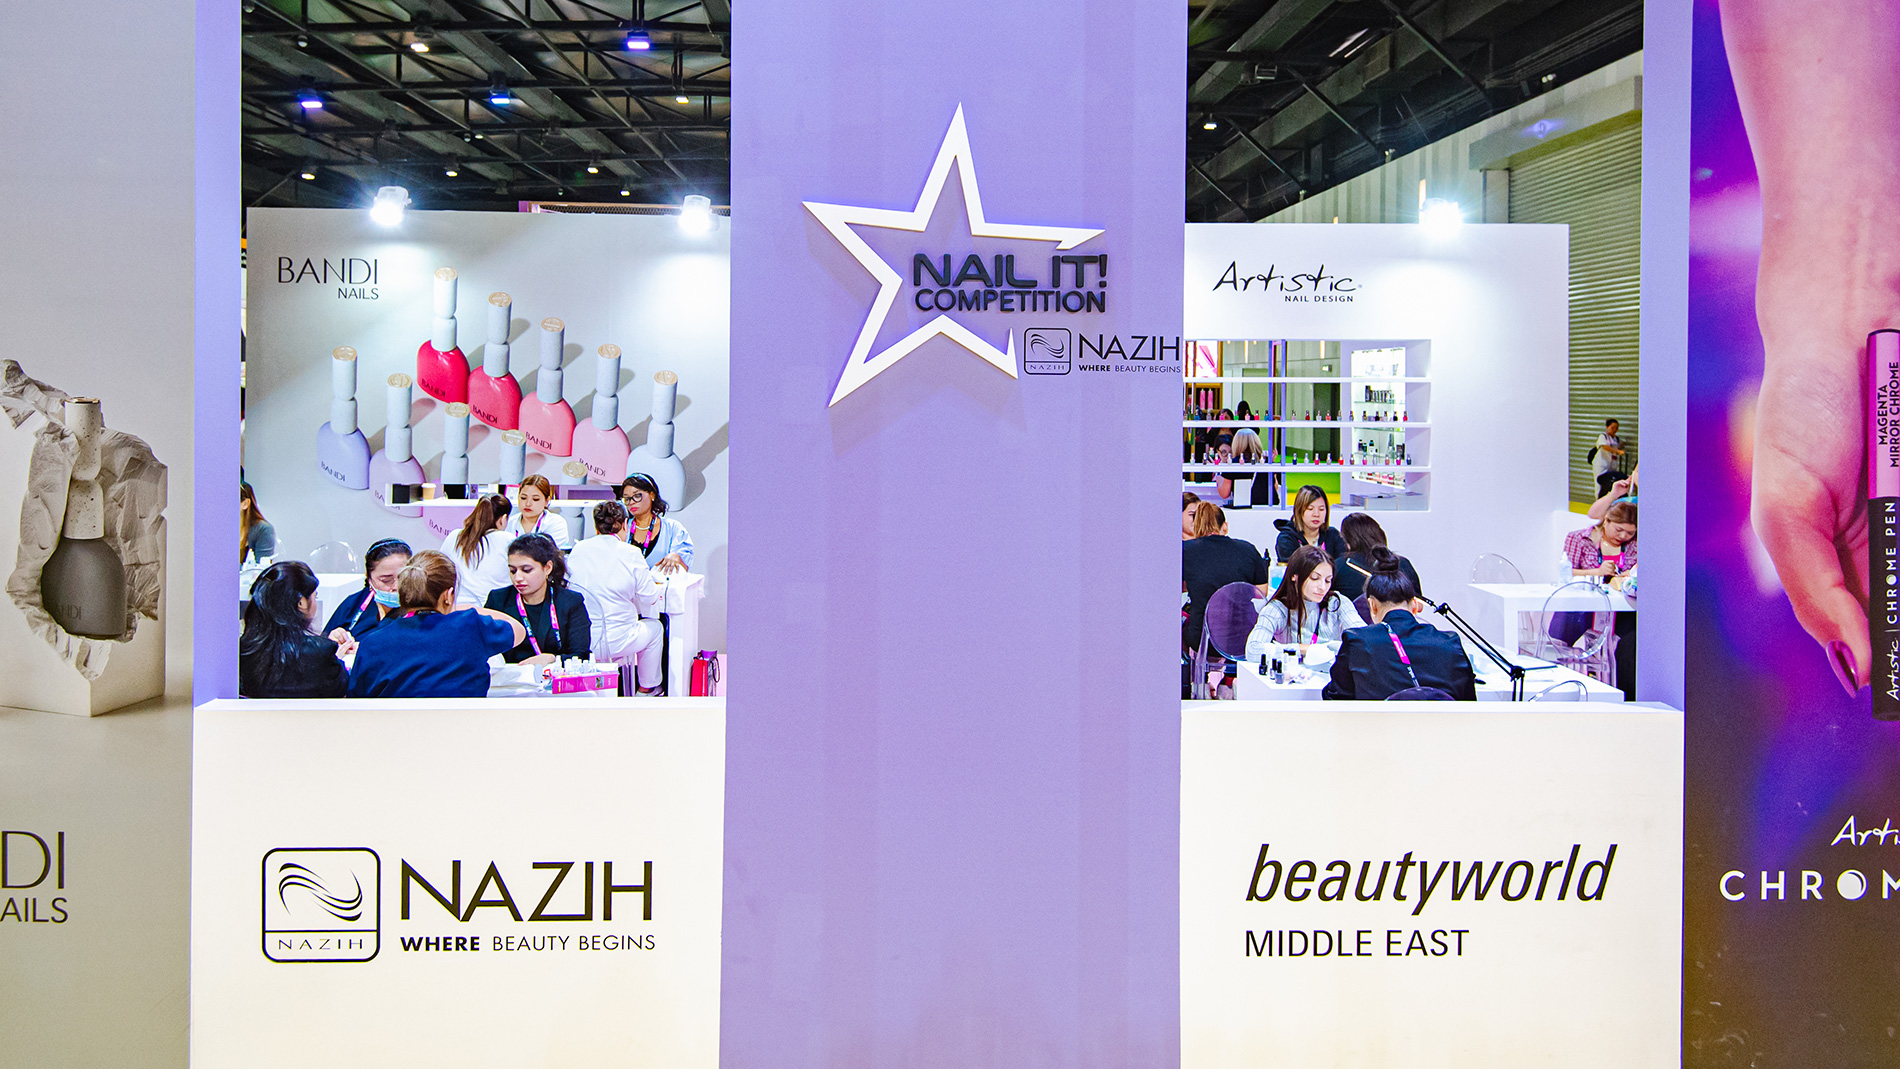 Beautyworld Middle East - Nail it! by Nazih Group